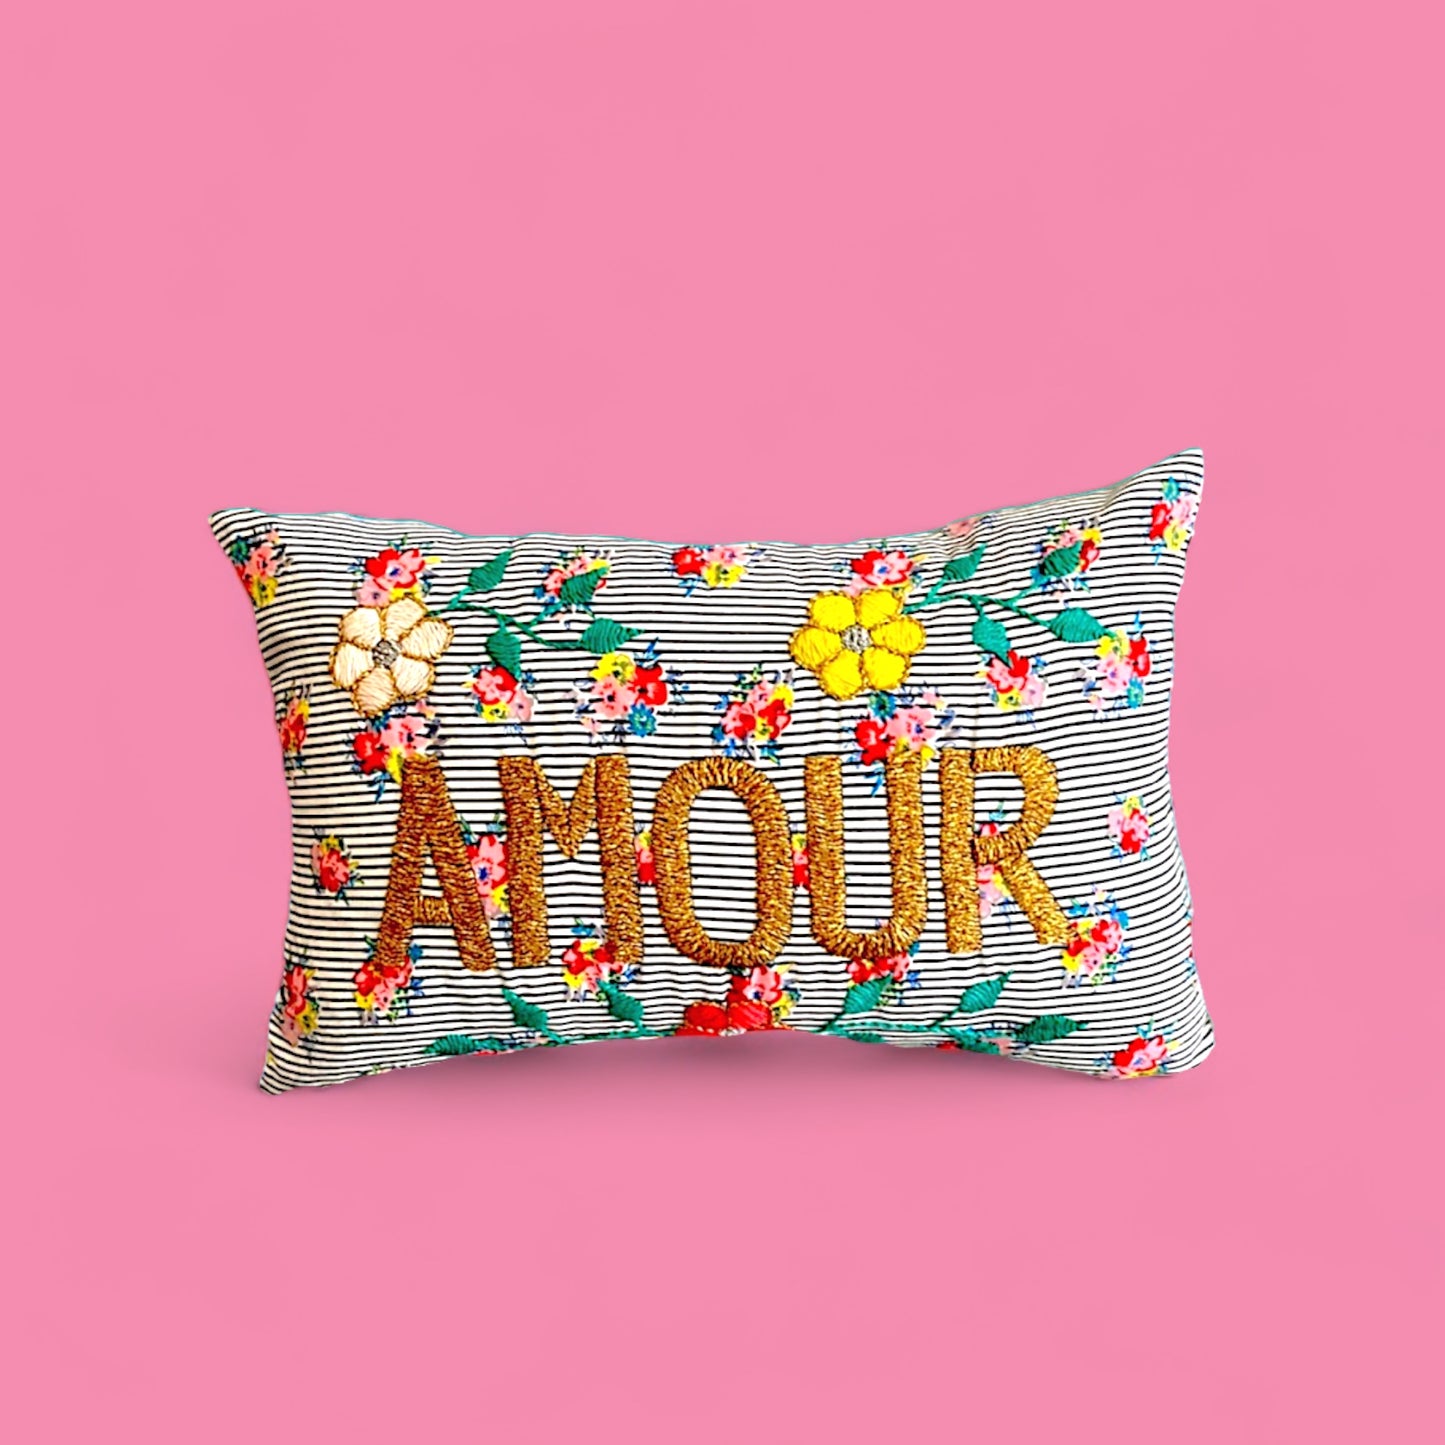 French Hand- Embroidered Mini Pillow - Amour - Hella Kitsch